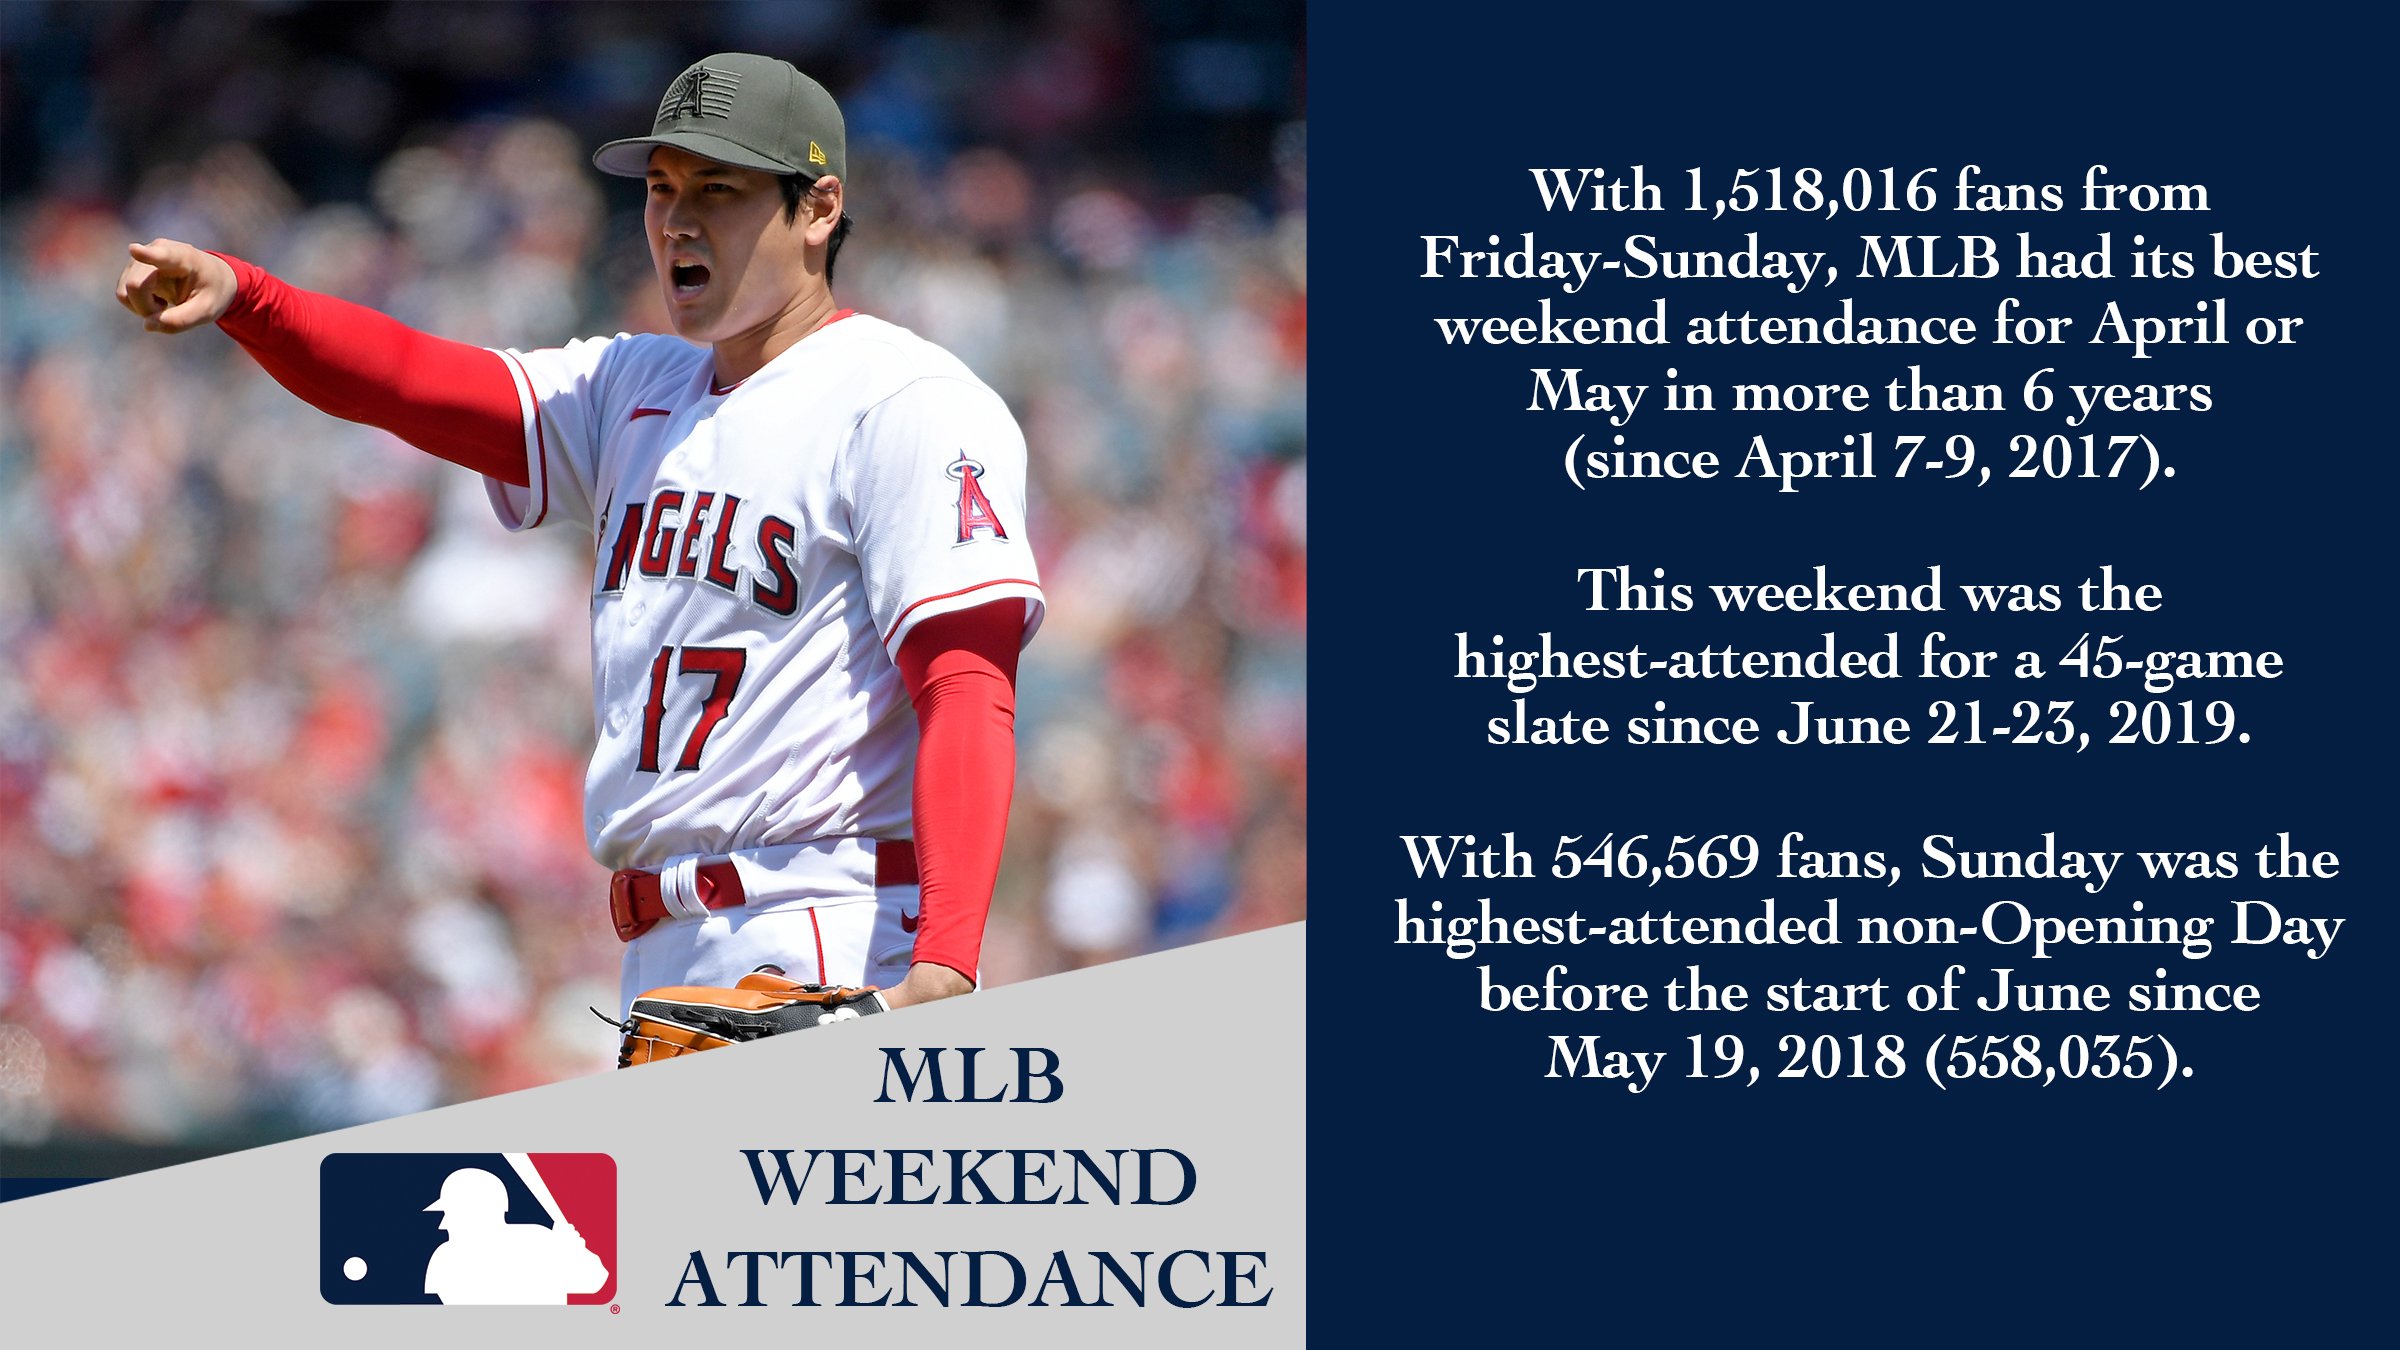 MLB Communications on X: This weekend's attendance of 1,518,016